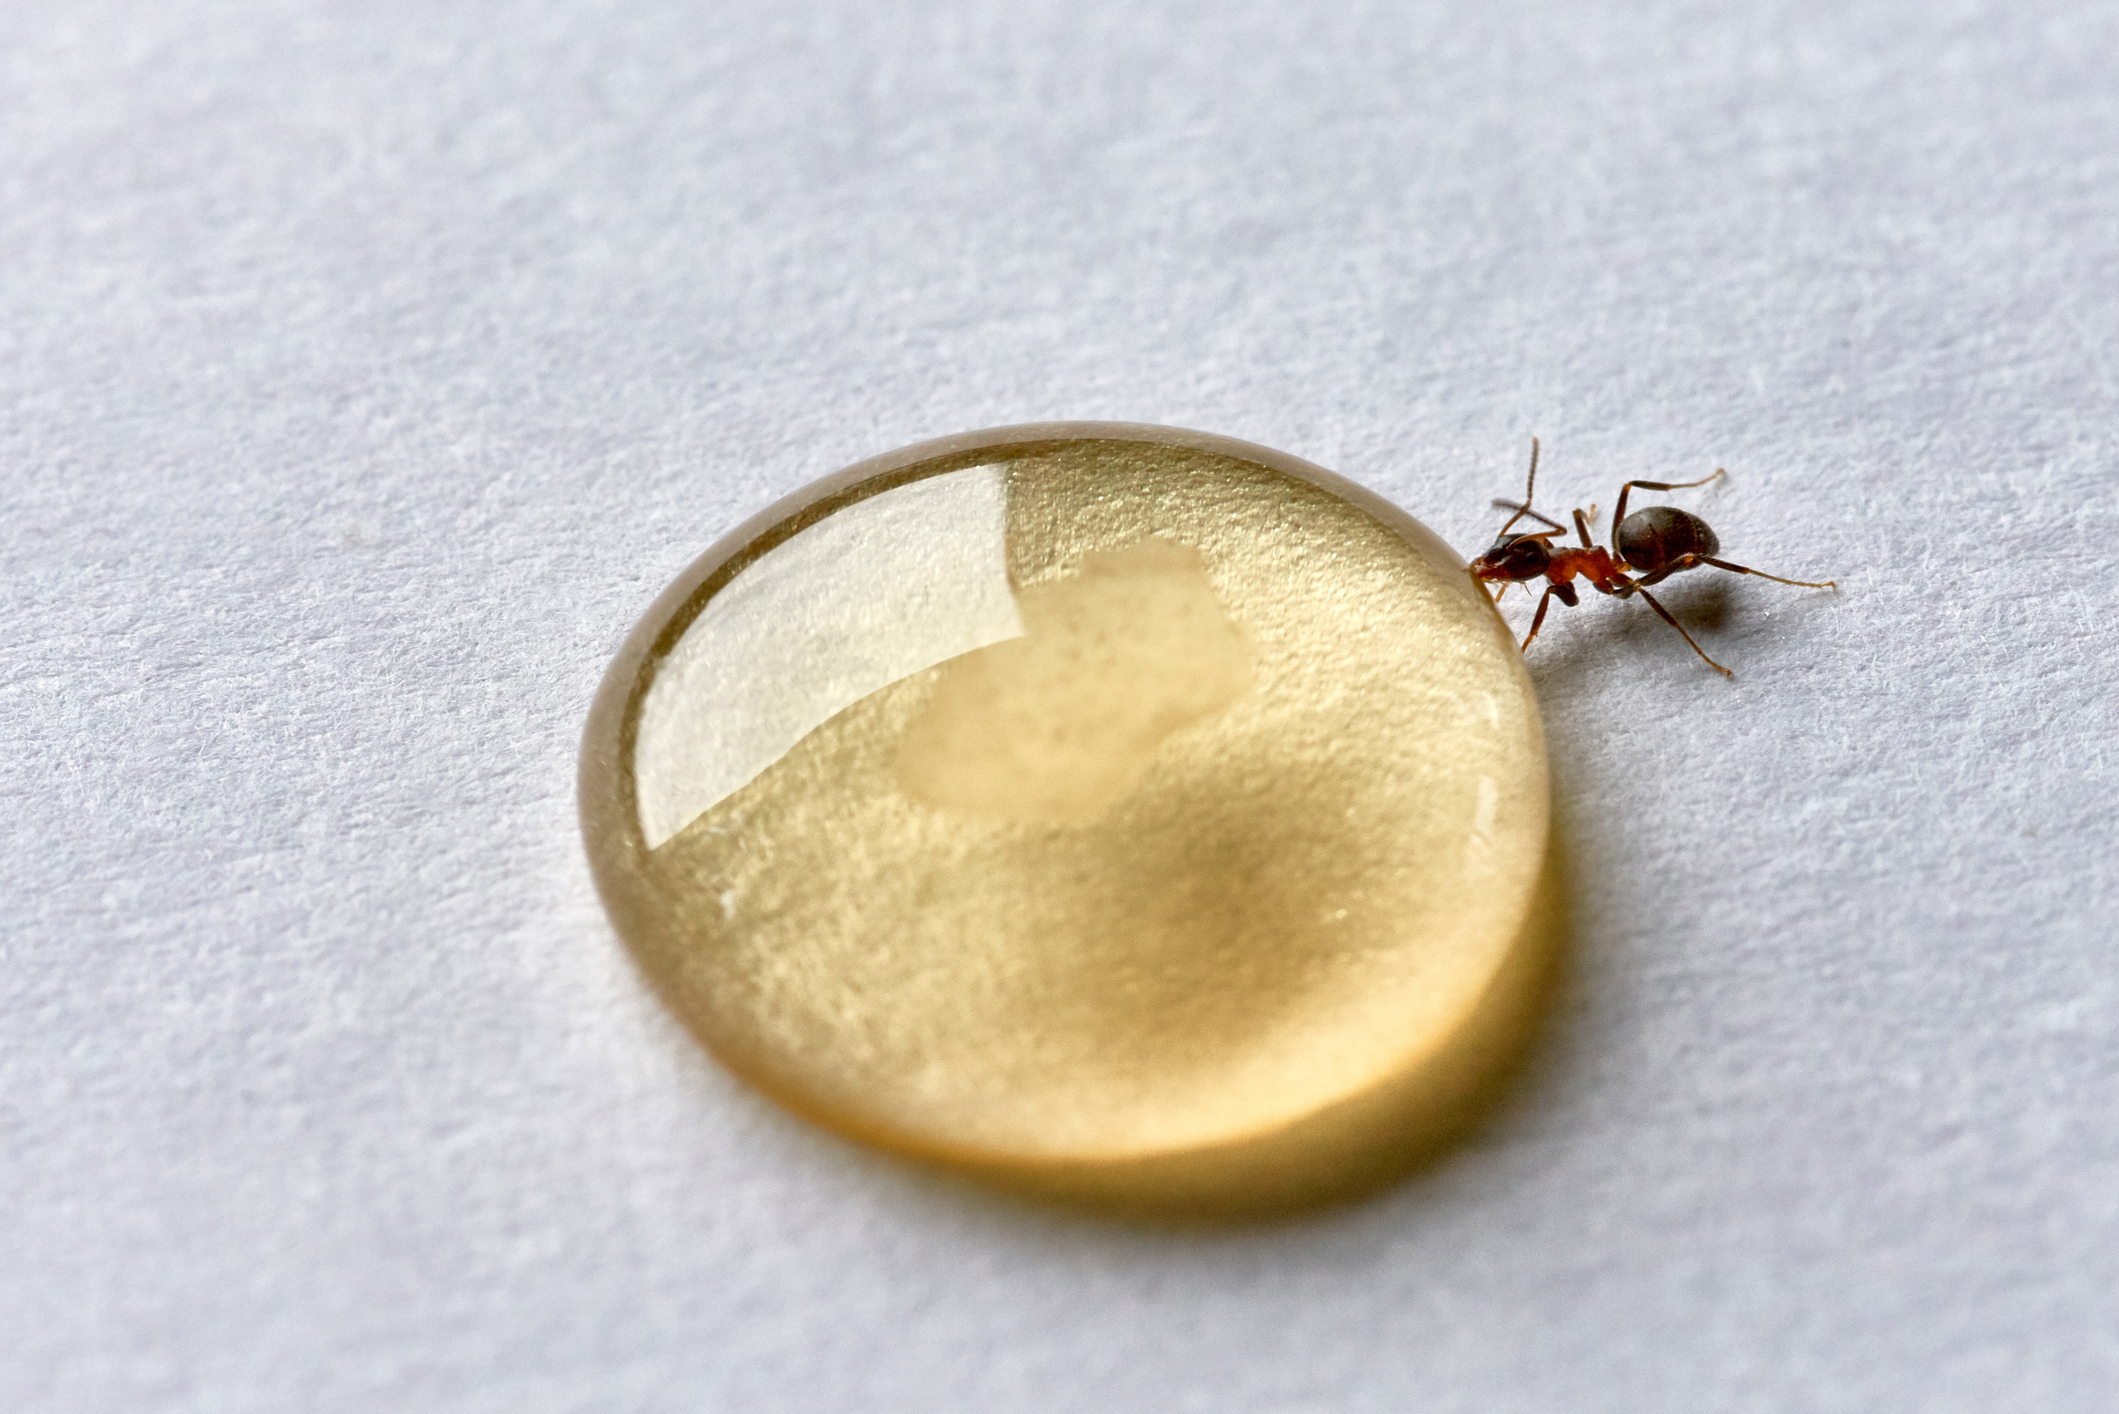 A single ant eating a drop of honey on a white background